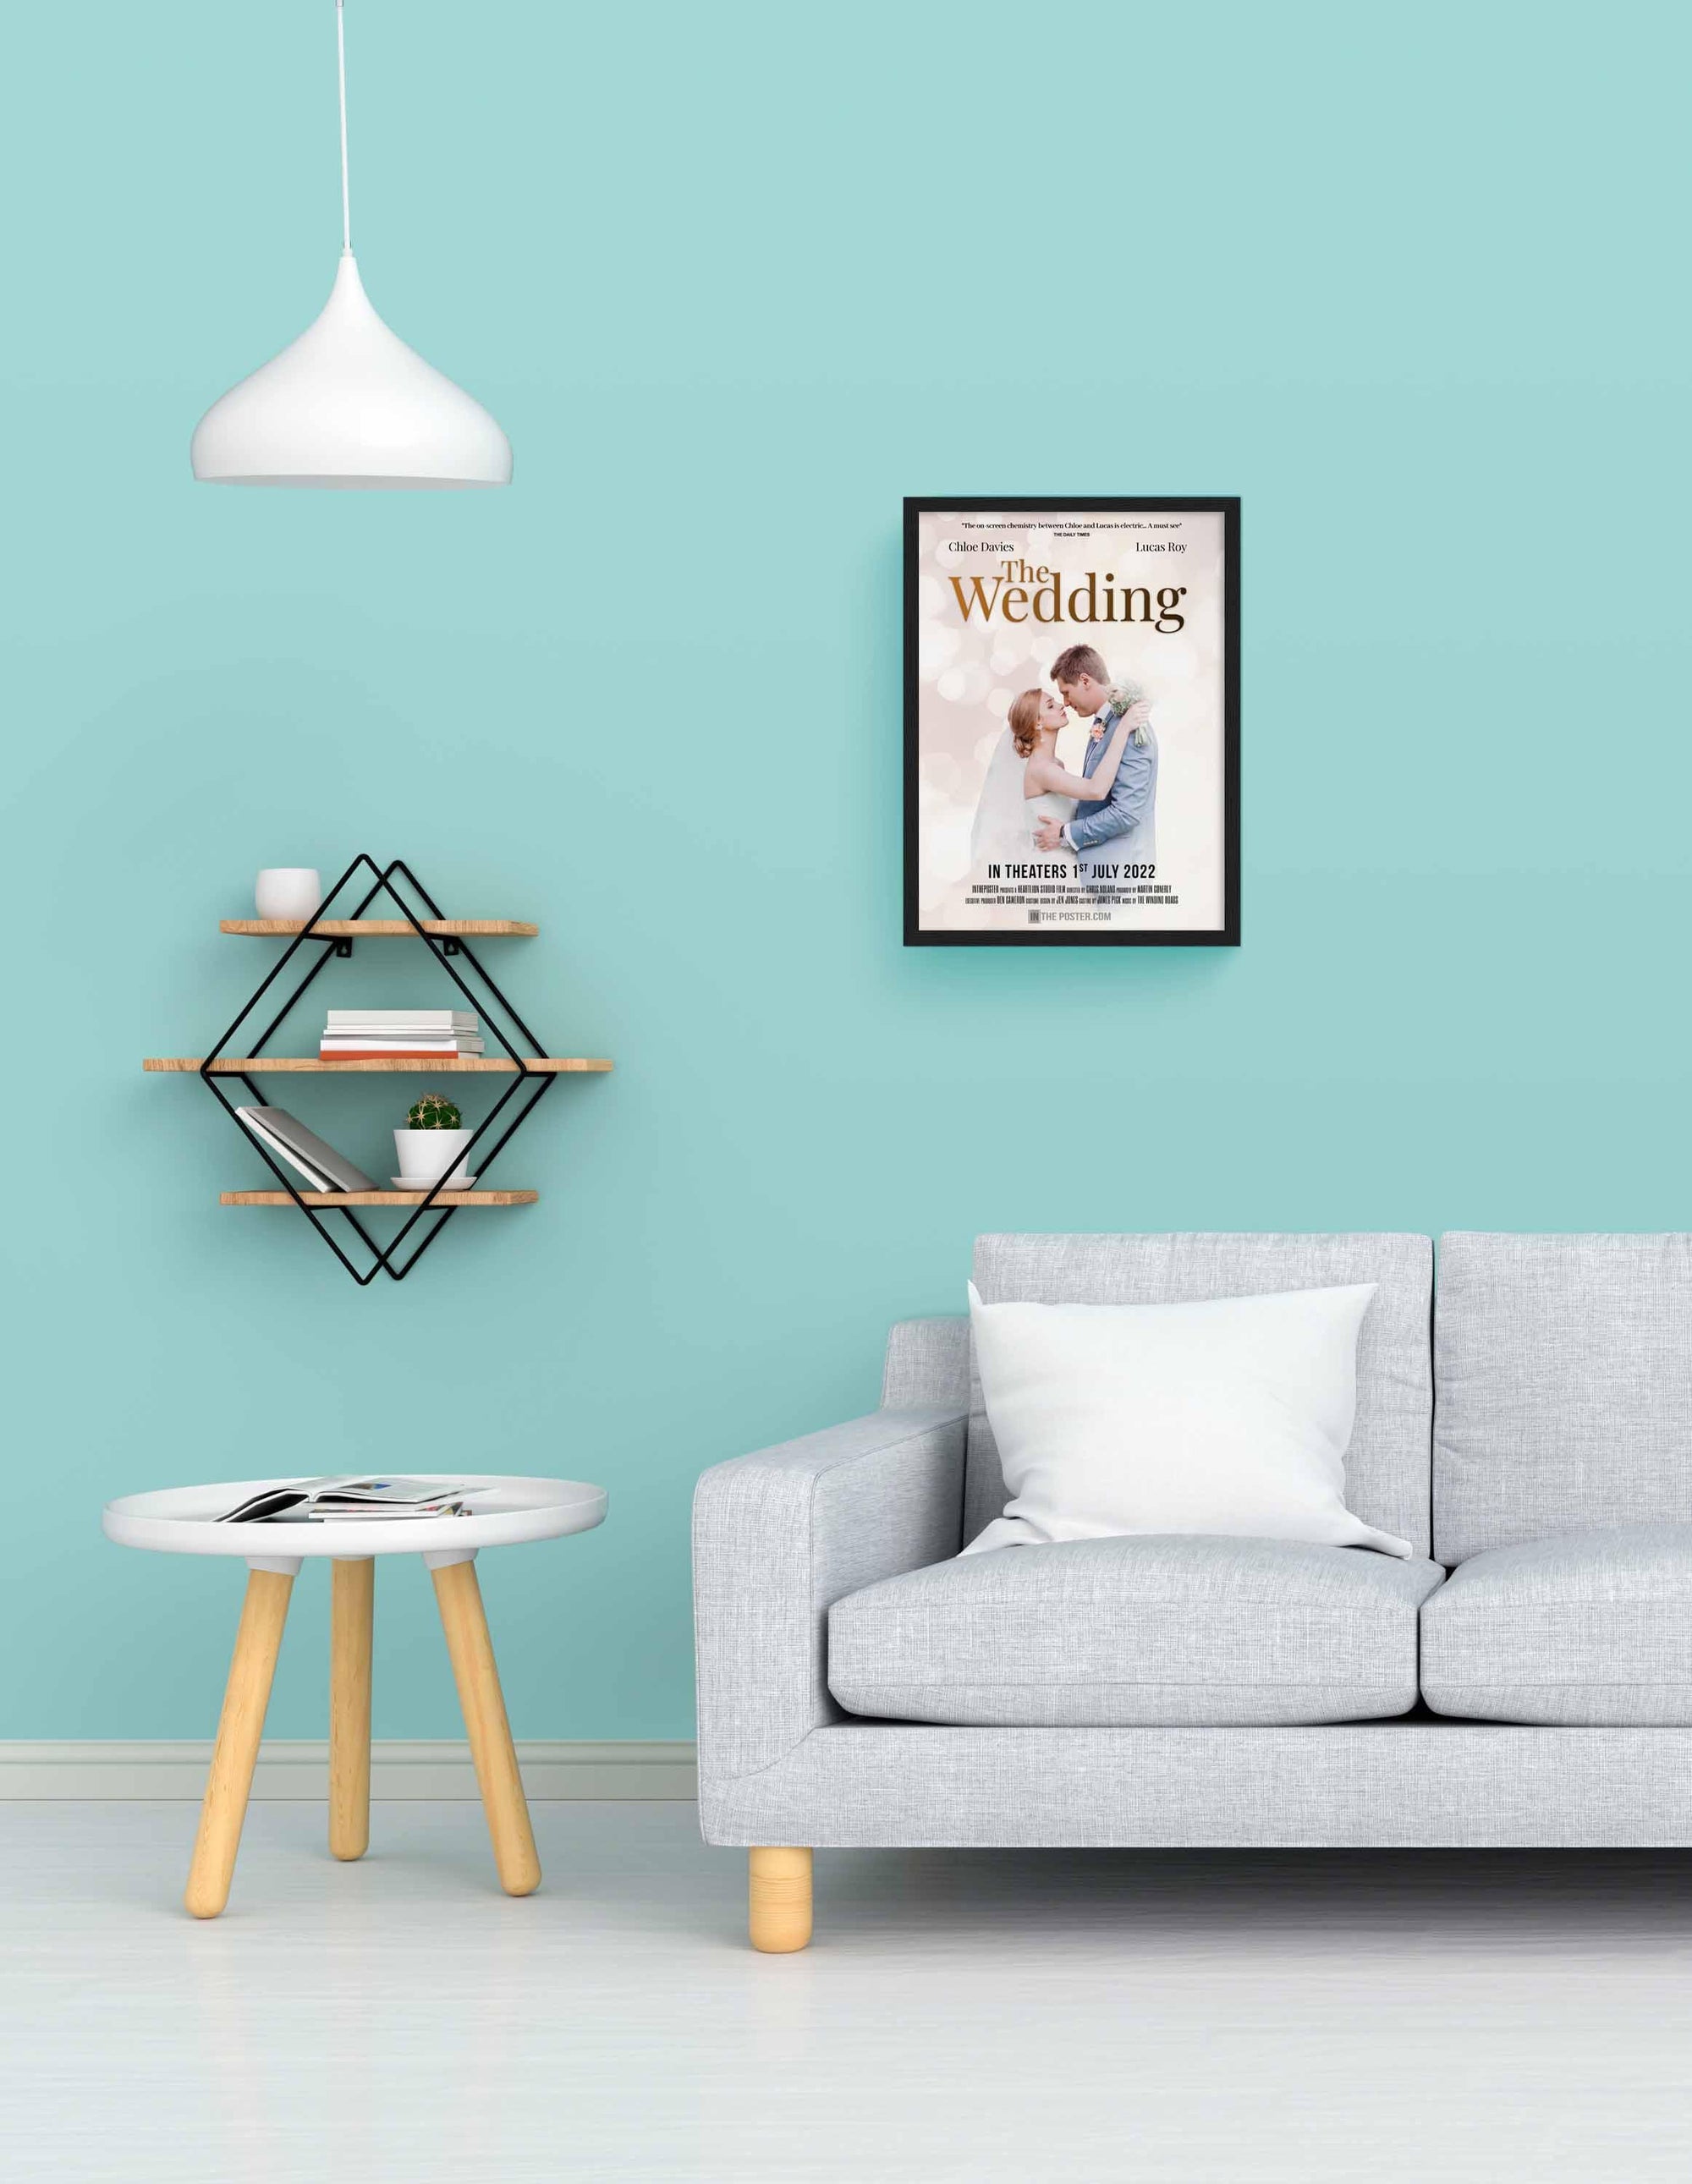 The Wedding - Movie Poster in Small Black Frame on a blue wall above a grey sofa